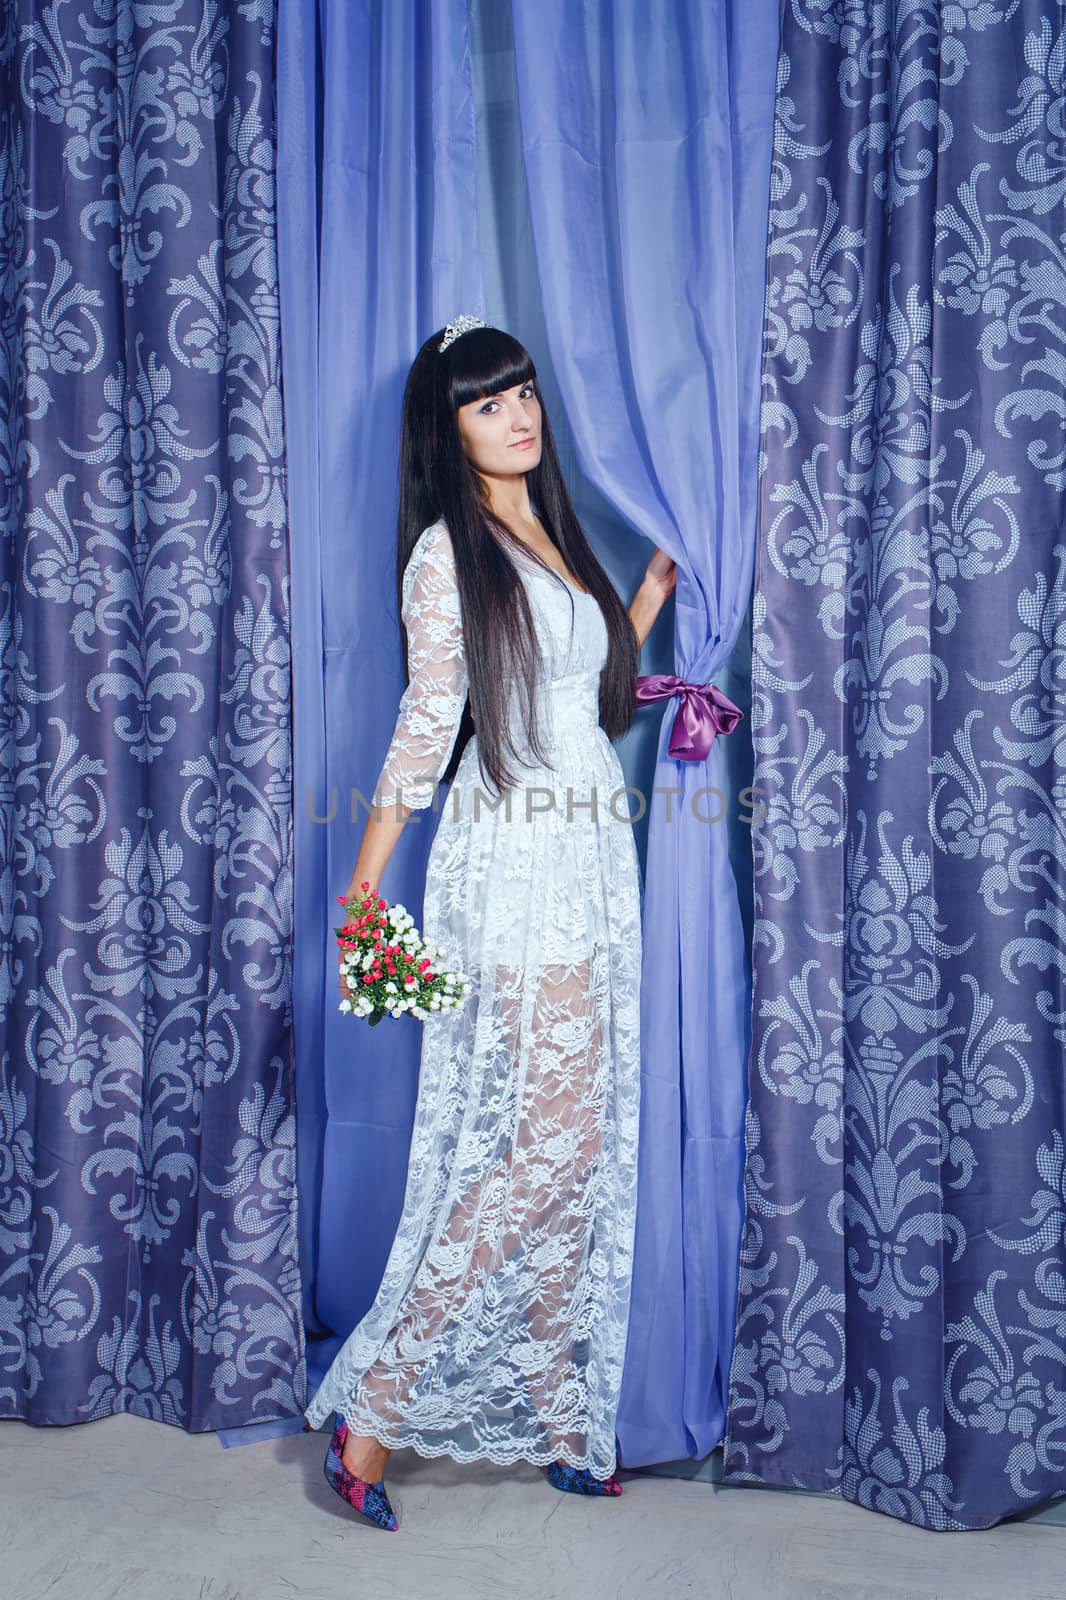 Attractive young girl with gorgeous bouquet of flowers shot in studio